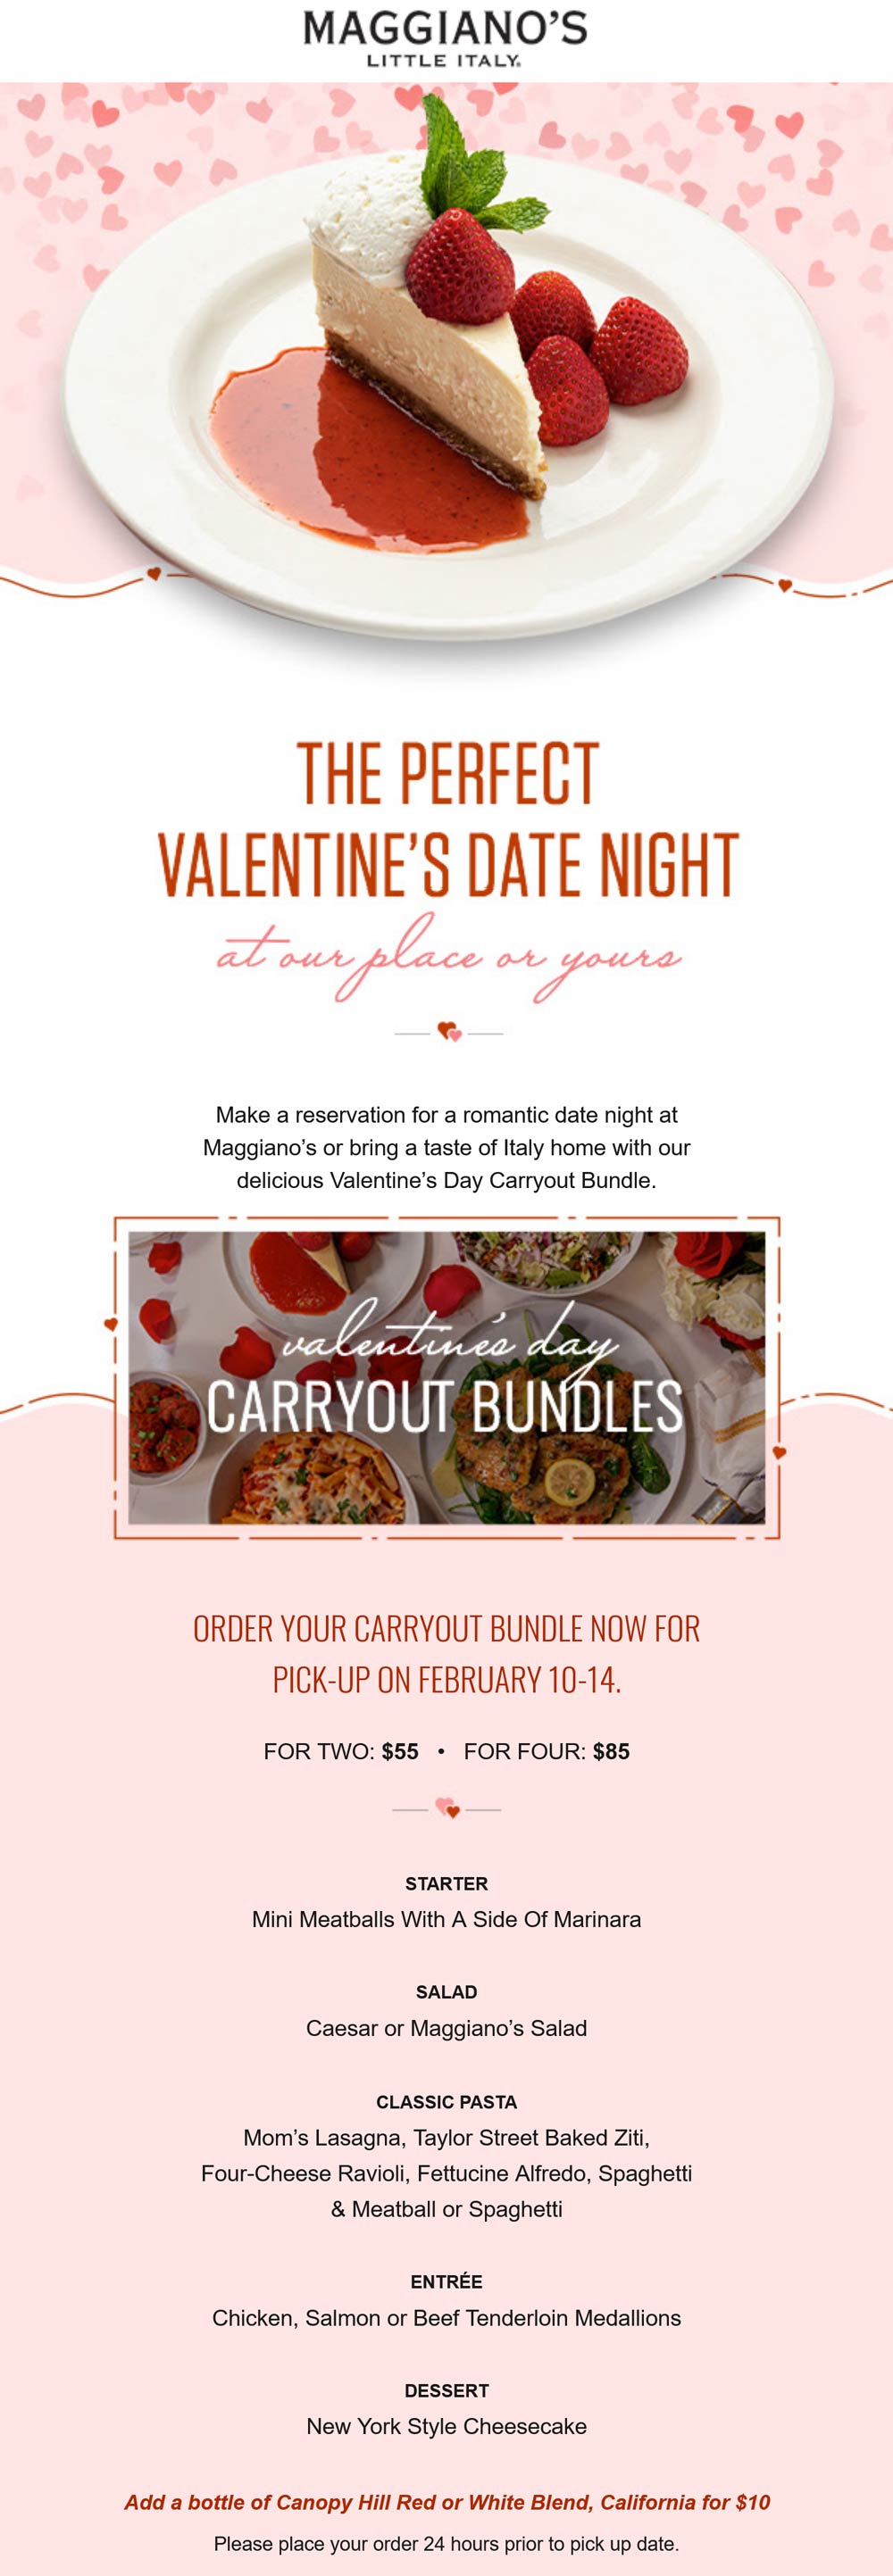 Maggianos Little Italy restaurants Coupon  Valentine carryout appetizer + salad + pasta + entree + cheesecake dinner for 2 = $55 at Maggianos Little Italy #maggianoslittleitaly 